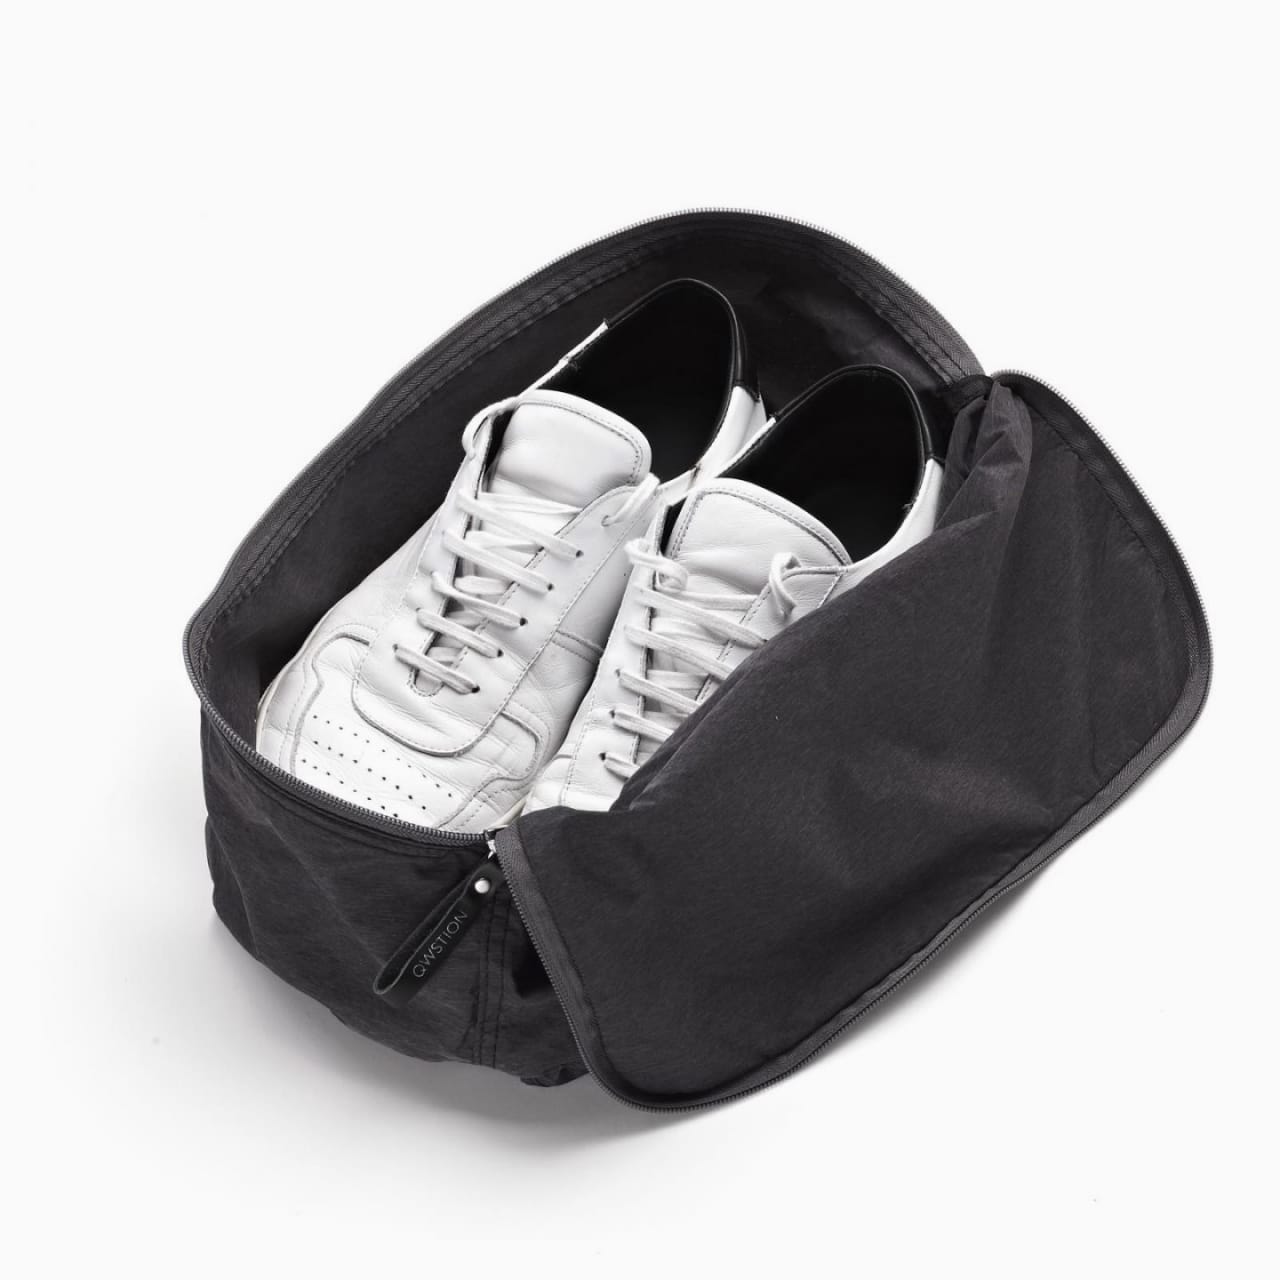 Black fabric shoe bag with zipper around 3 sides, holding pair of white sneakers.